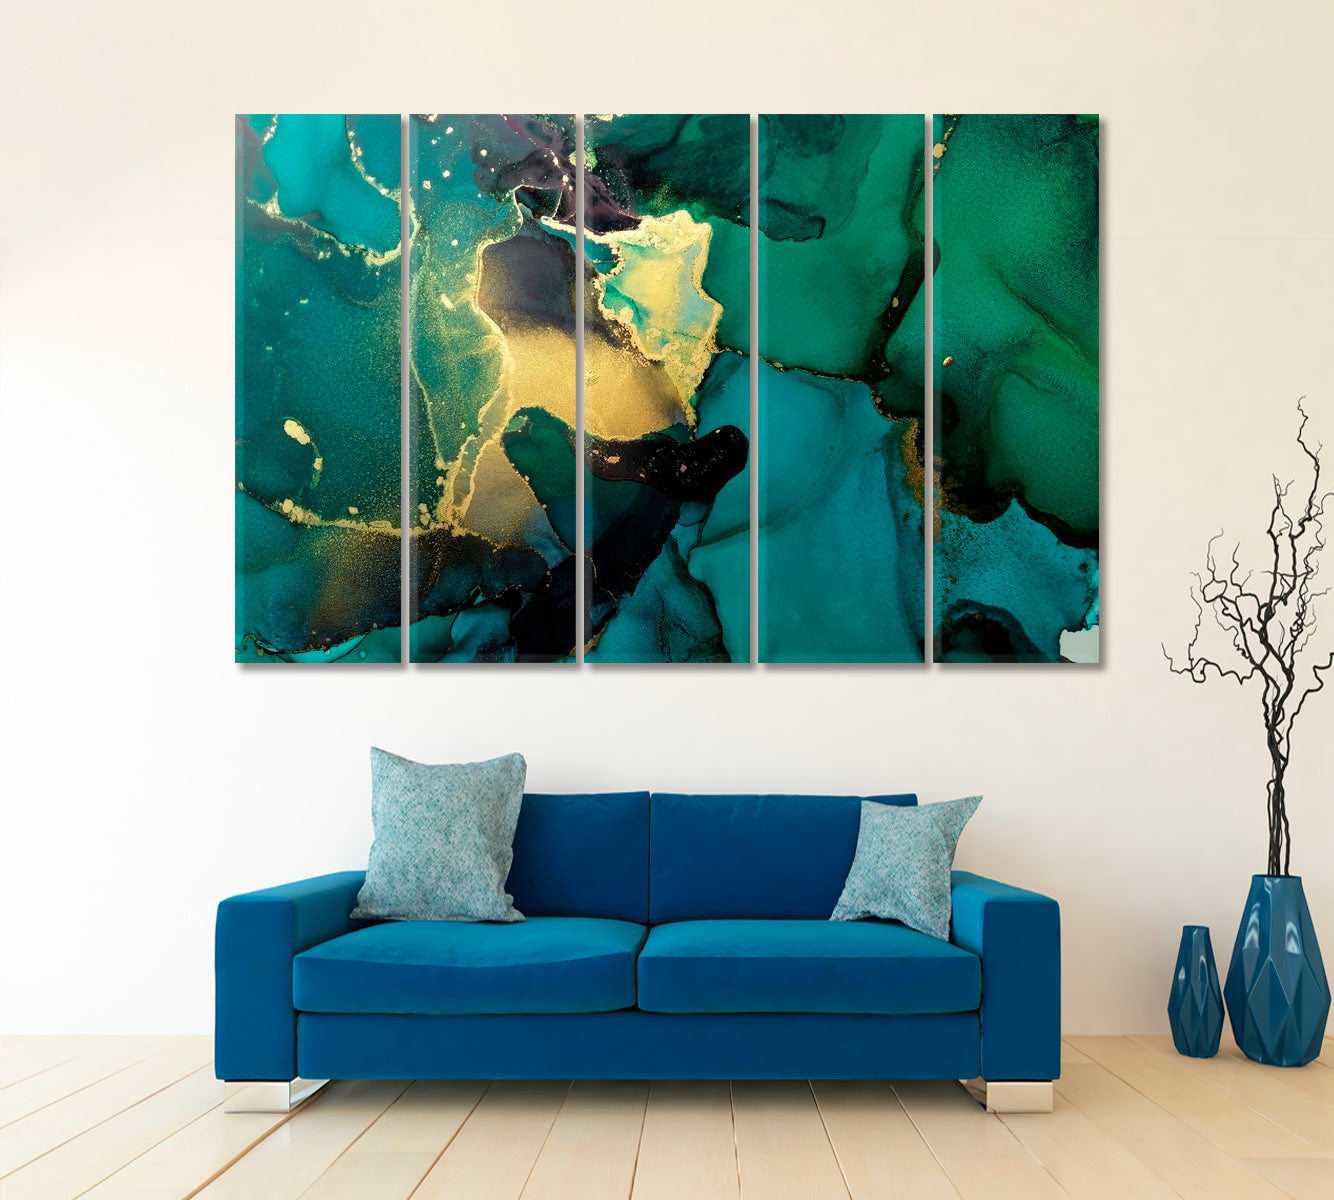 Luxury Abstract Fluid Art Painting Alcohol Ink Green and Gold Fluid Art, Oriental Marbling Canvas Print Artesty 5 panels 36" x 24" 